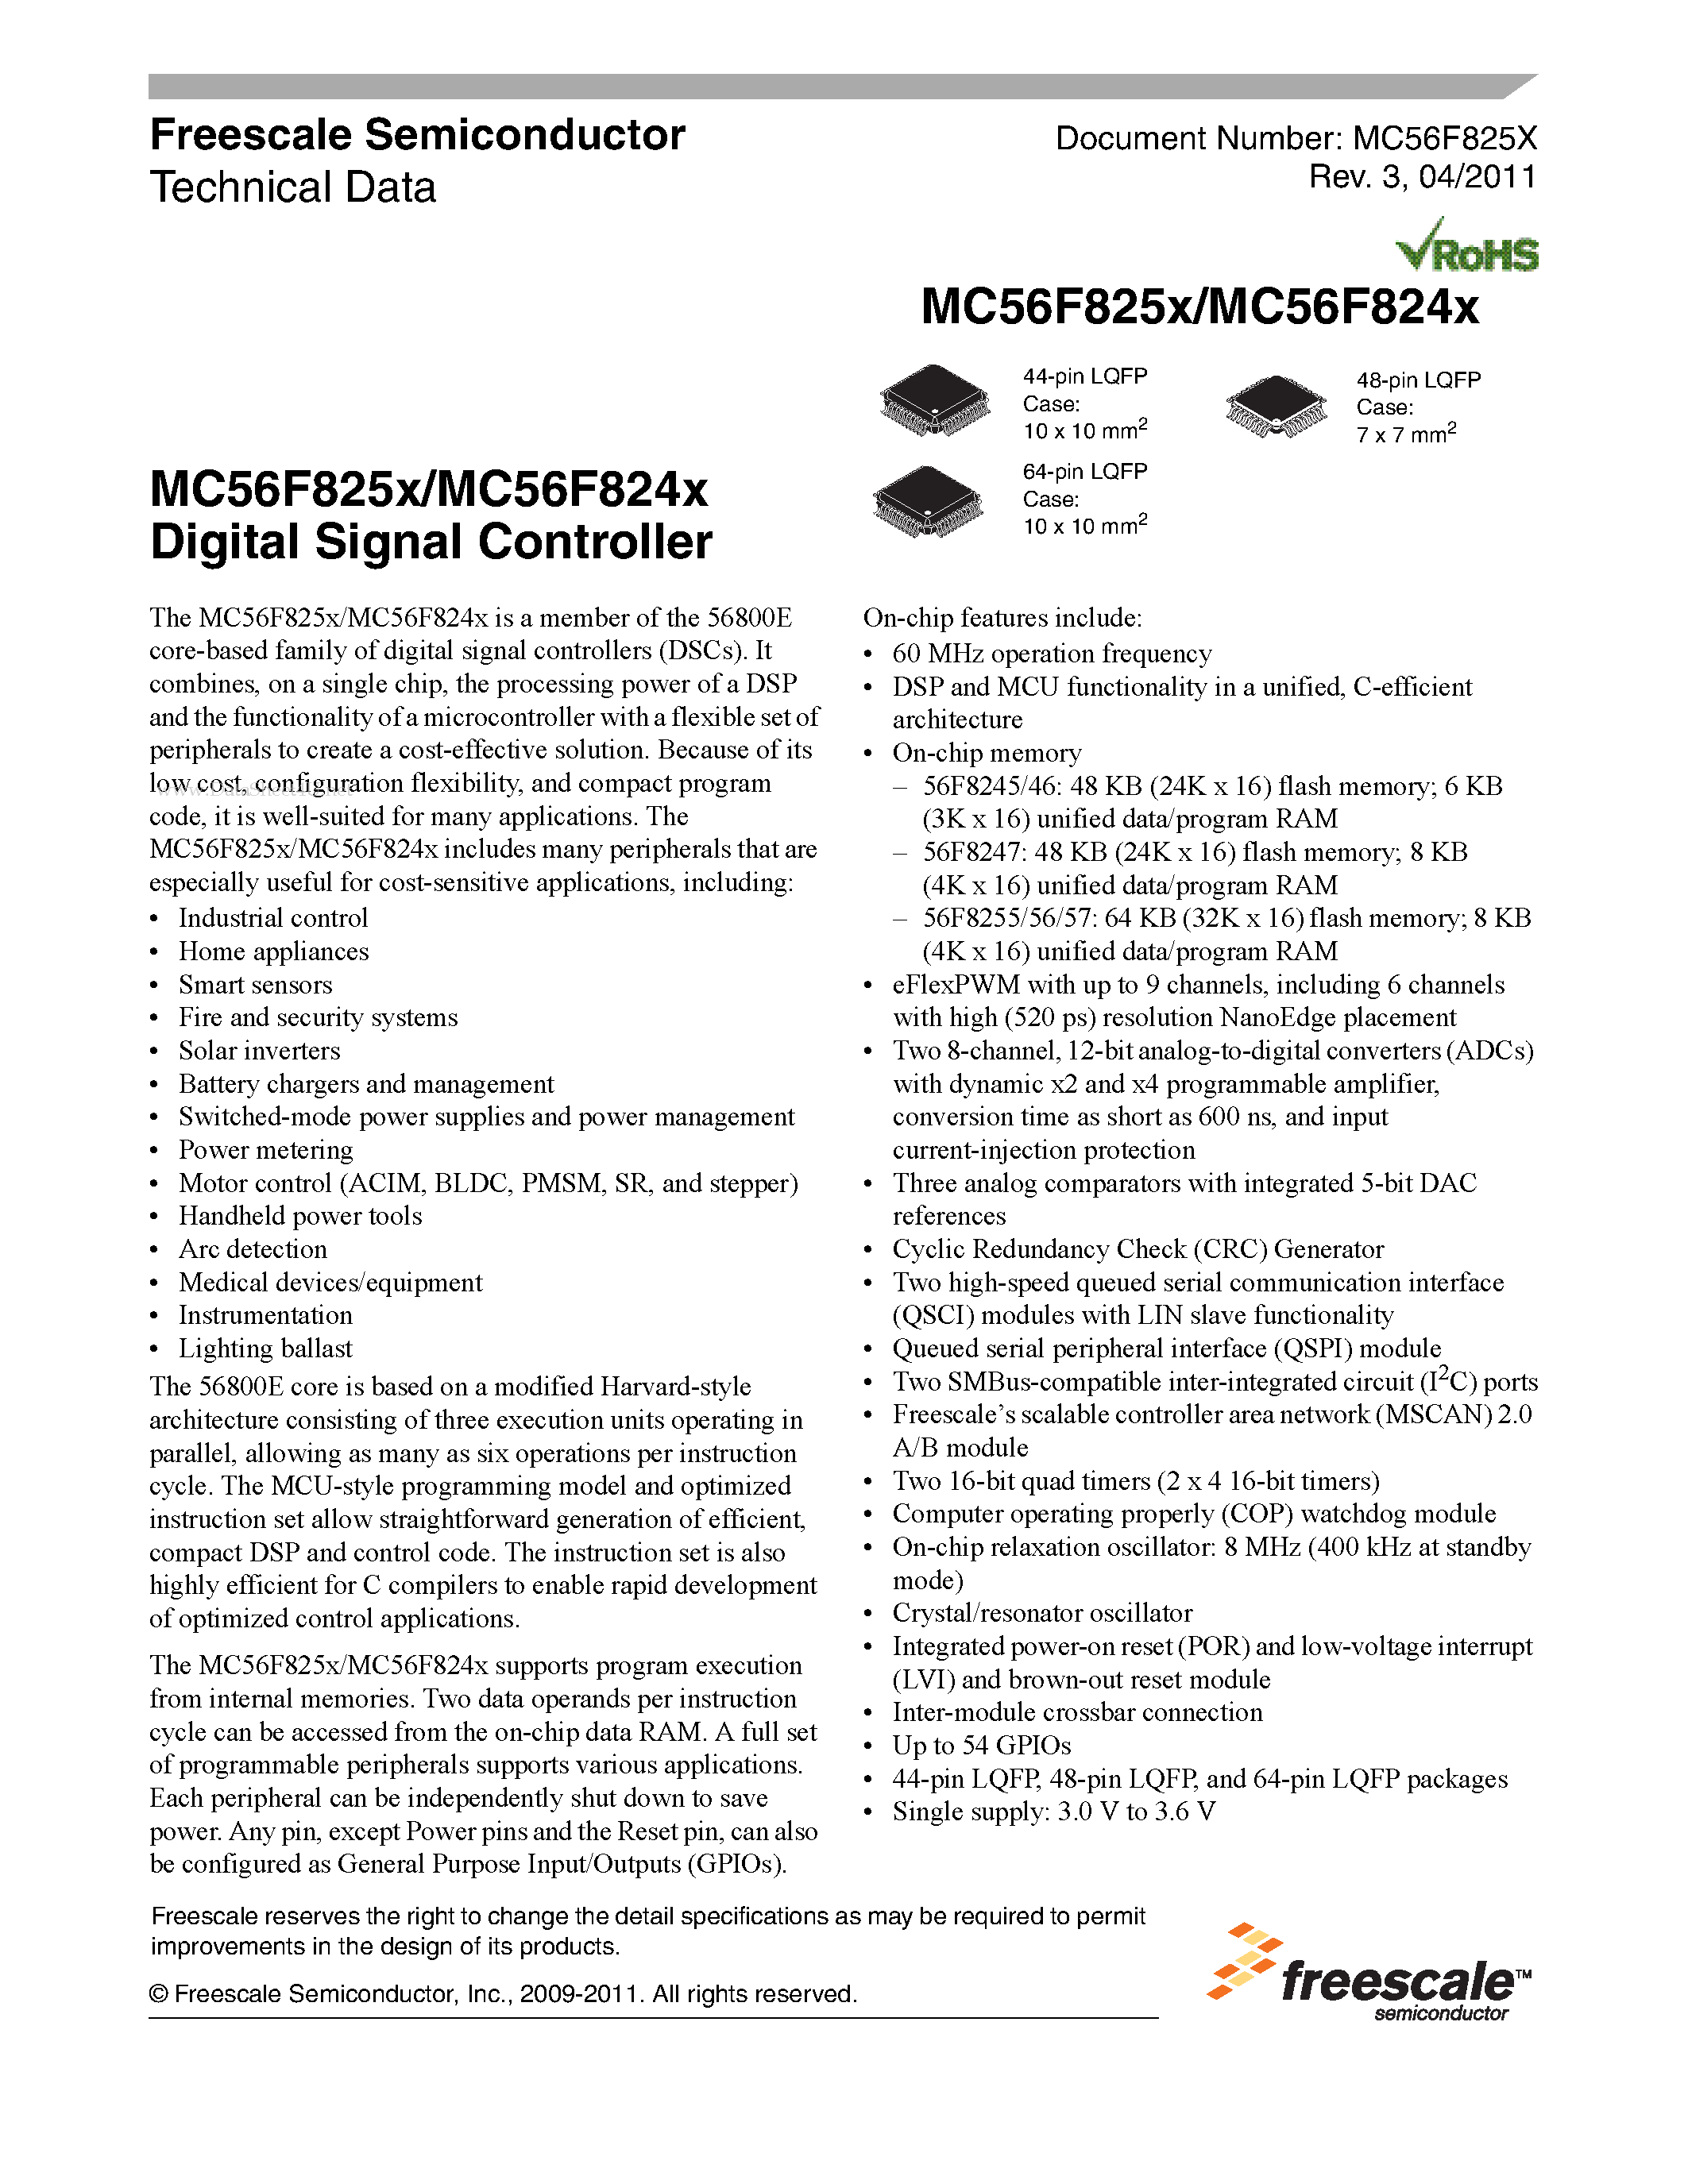 Datasheet MC56F8245 - (MC56F824x / MC56F825x) Digital Signal Controller Battery chargers and management page 1